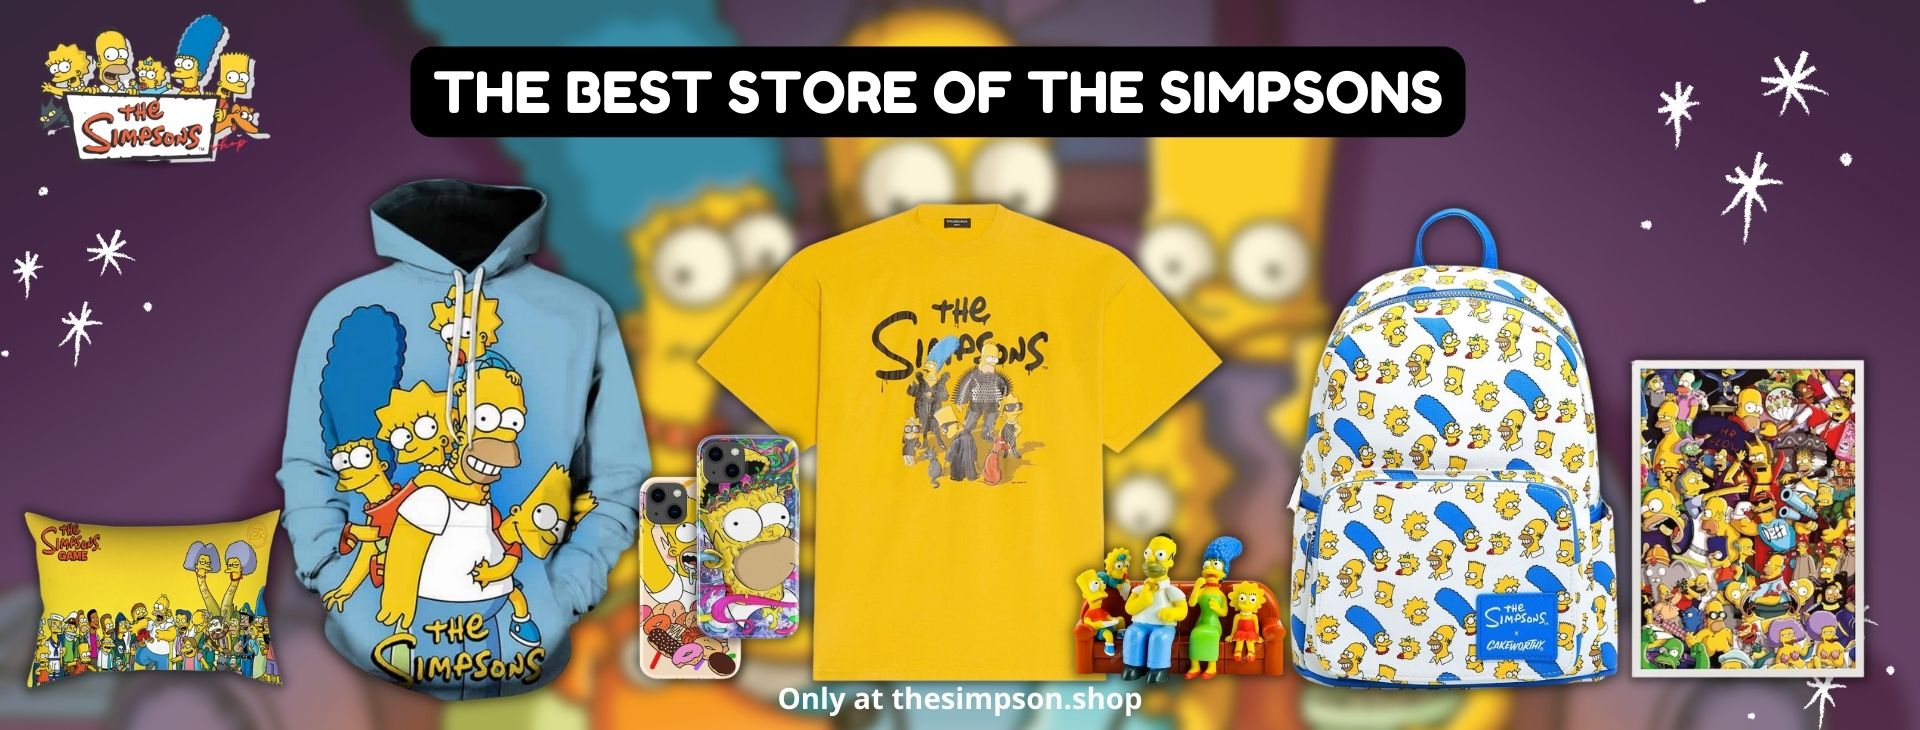 The Simpsons Banner - The Simpson Shop